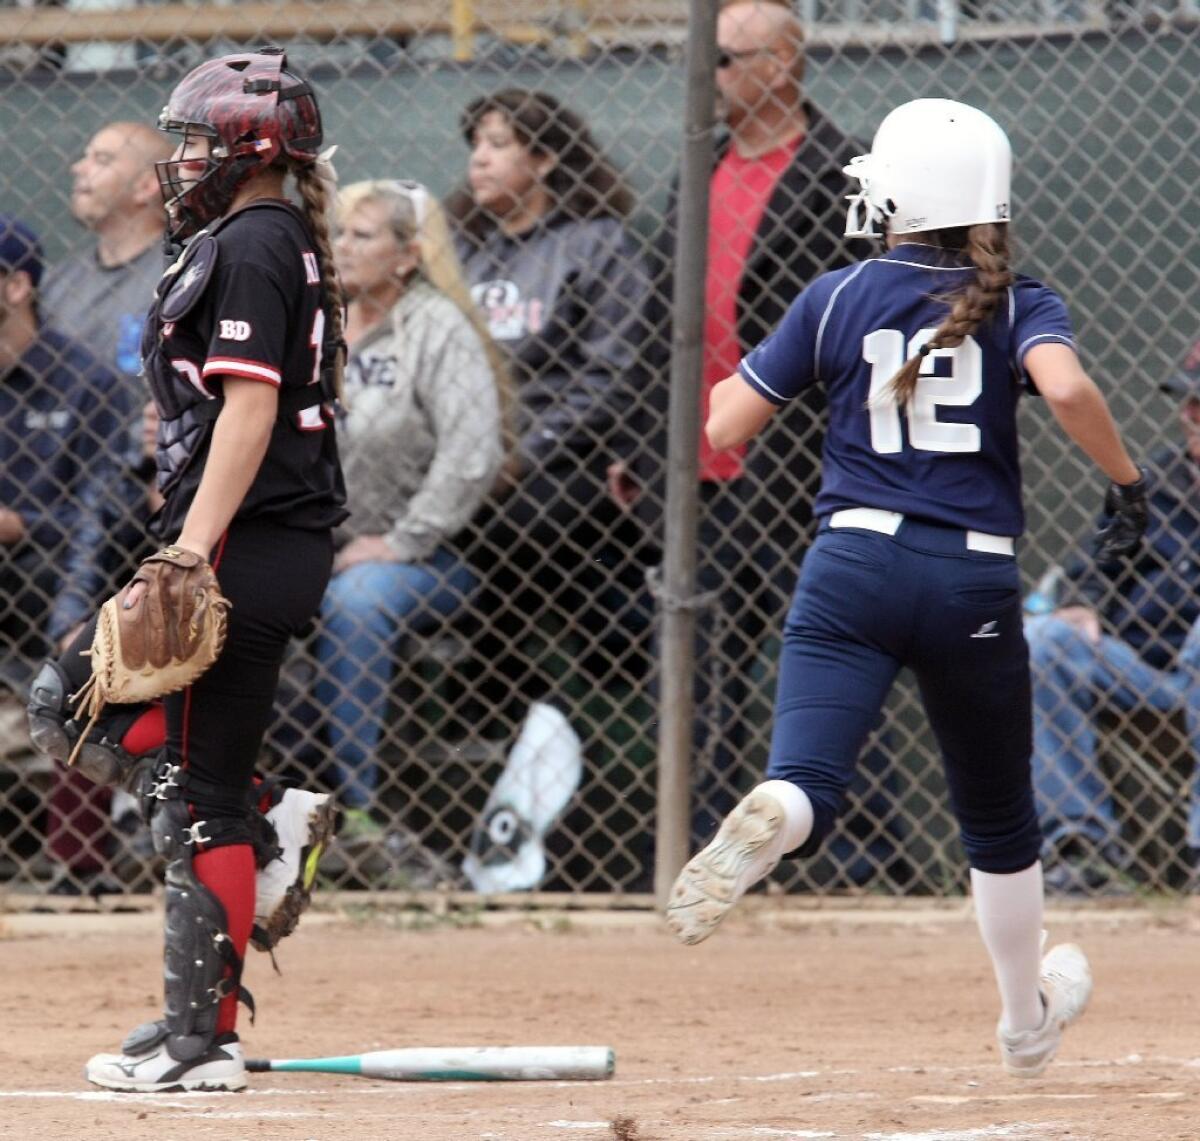 Alyssa Hernandez, right, and the Crescenta Valley softball team rallied past Glendale, 8-5, on Thursday.